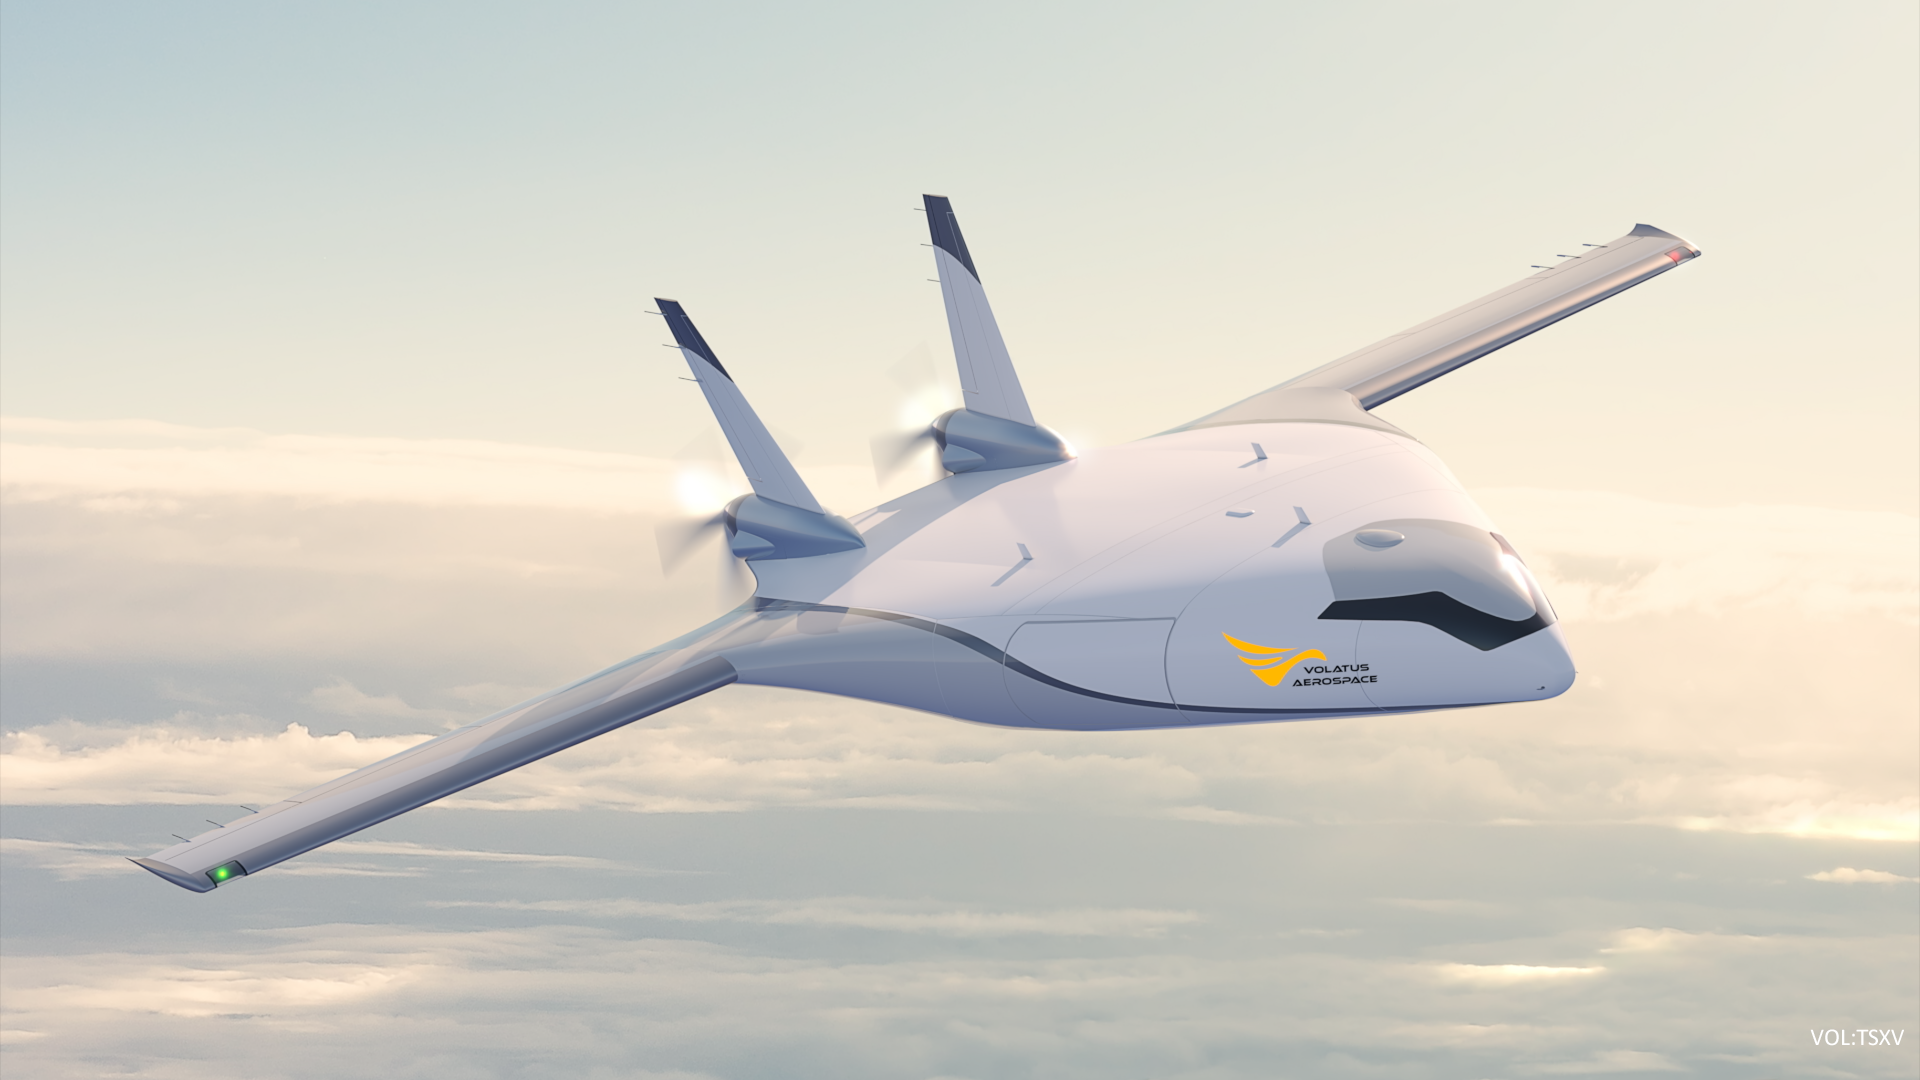 Volatus Aerospace Secures First Production Delivery Slot for Natilus Large Remotely Piloted Cargo Drone